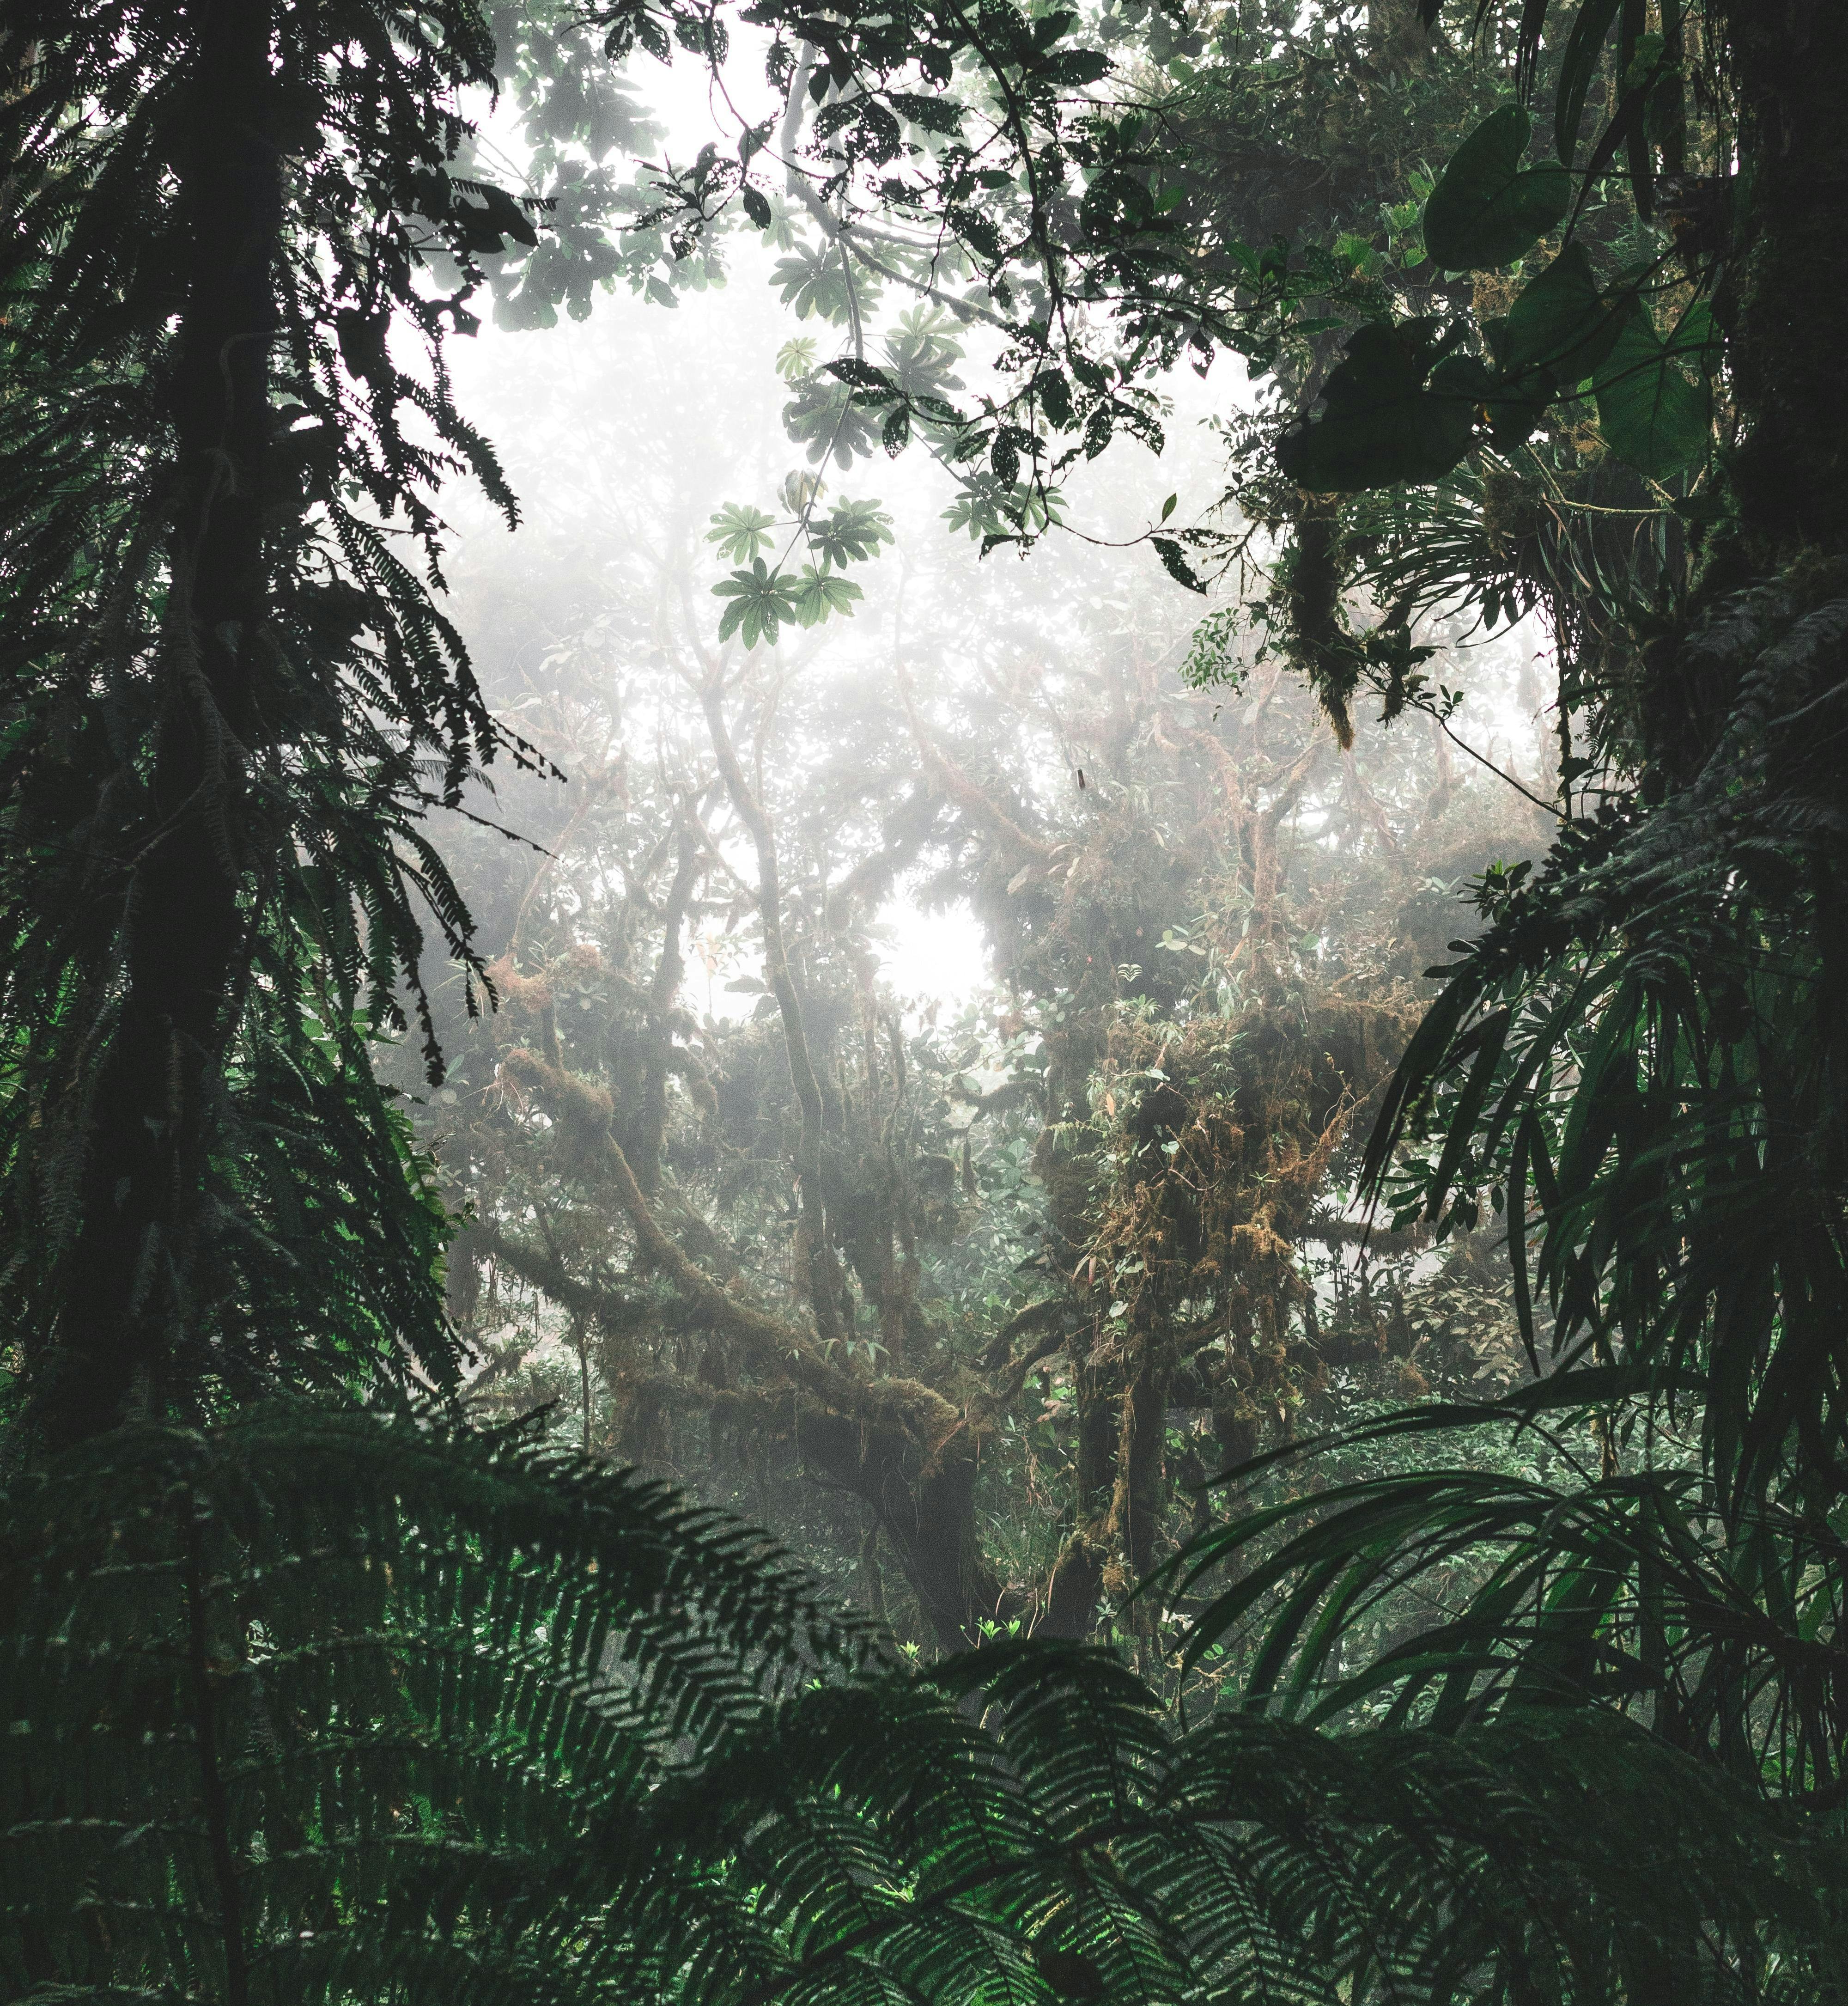 Jungle Shower: 8-Hour Tranquil Rainforest Soundscape for Relaxation, Studying & Sleep